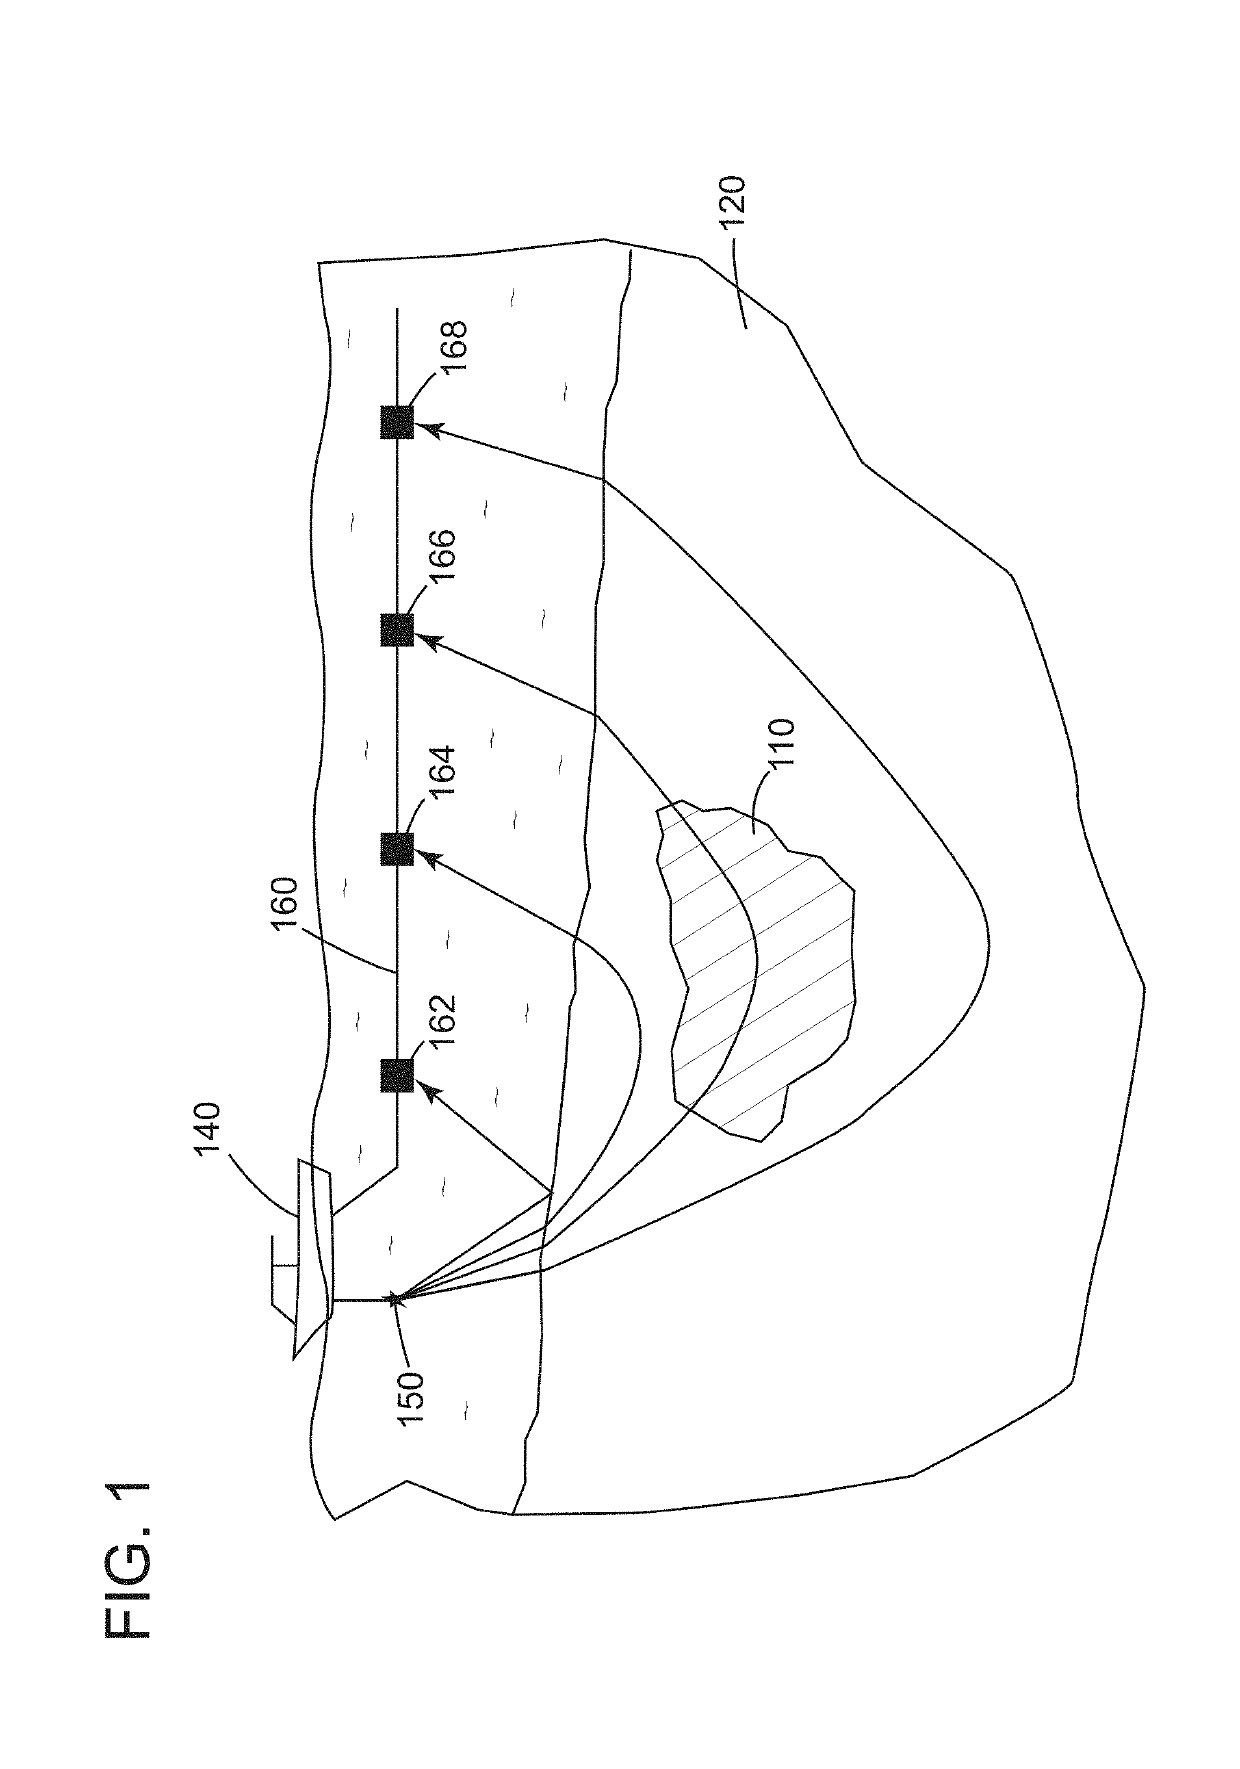 Methods using travel-time full waveform inversion for imaging subsurface formations with salt bodies